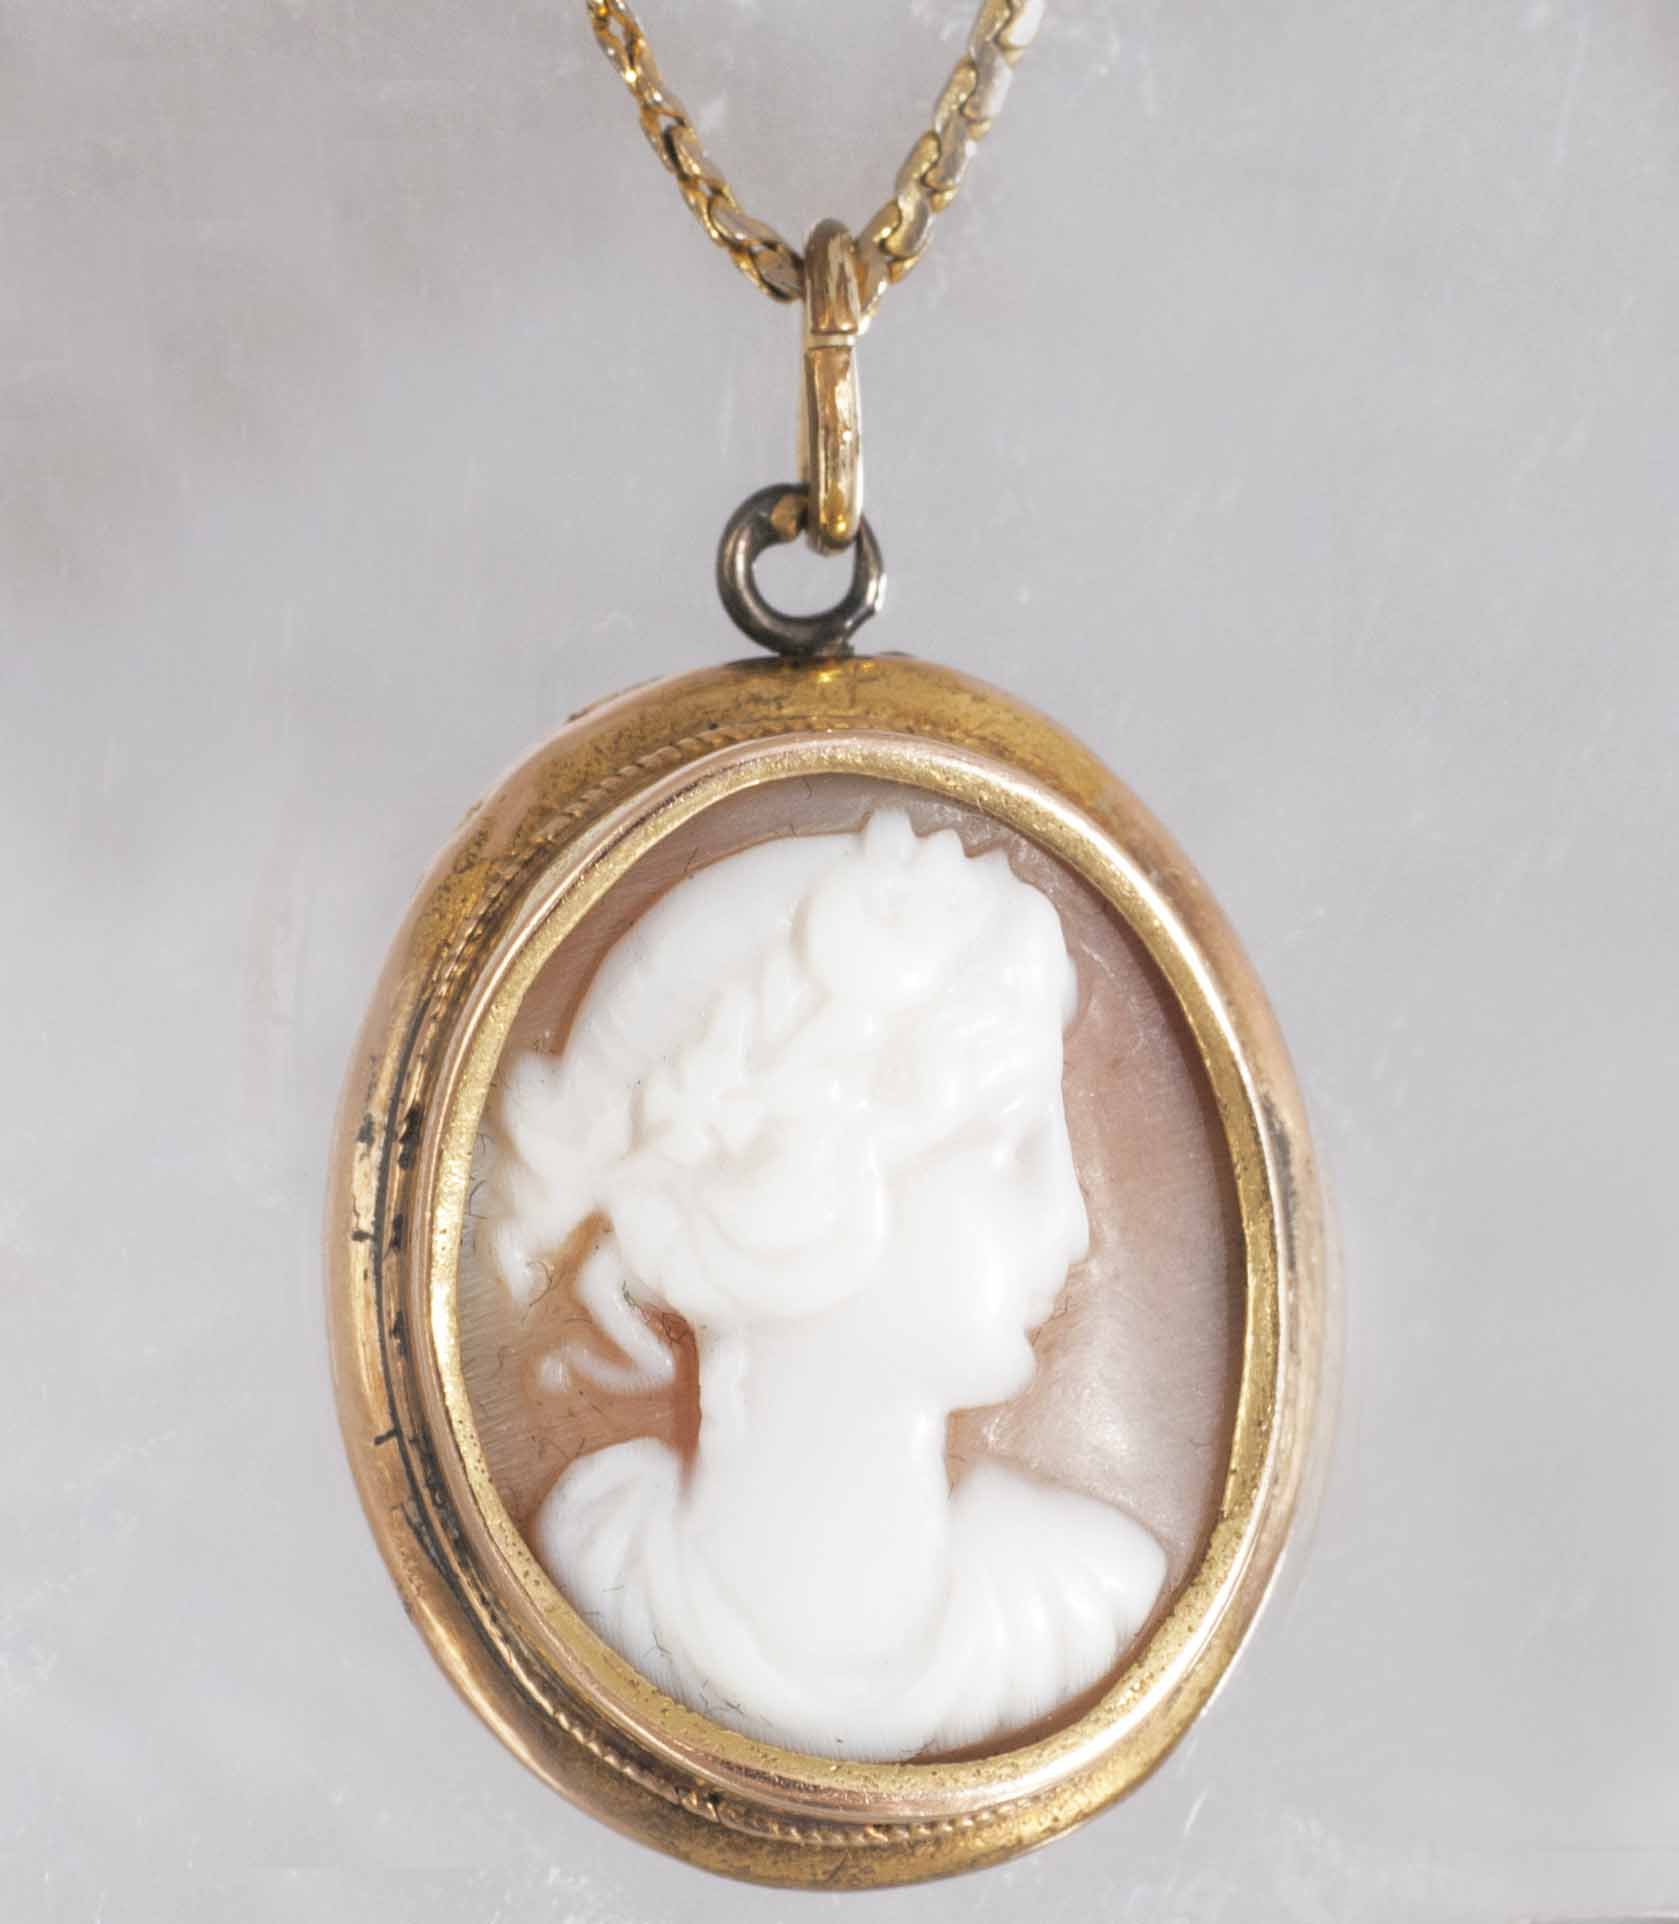 An antique cameo jewellery set with pendant and brooch - image 2